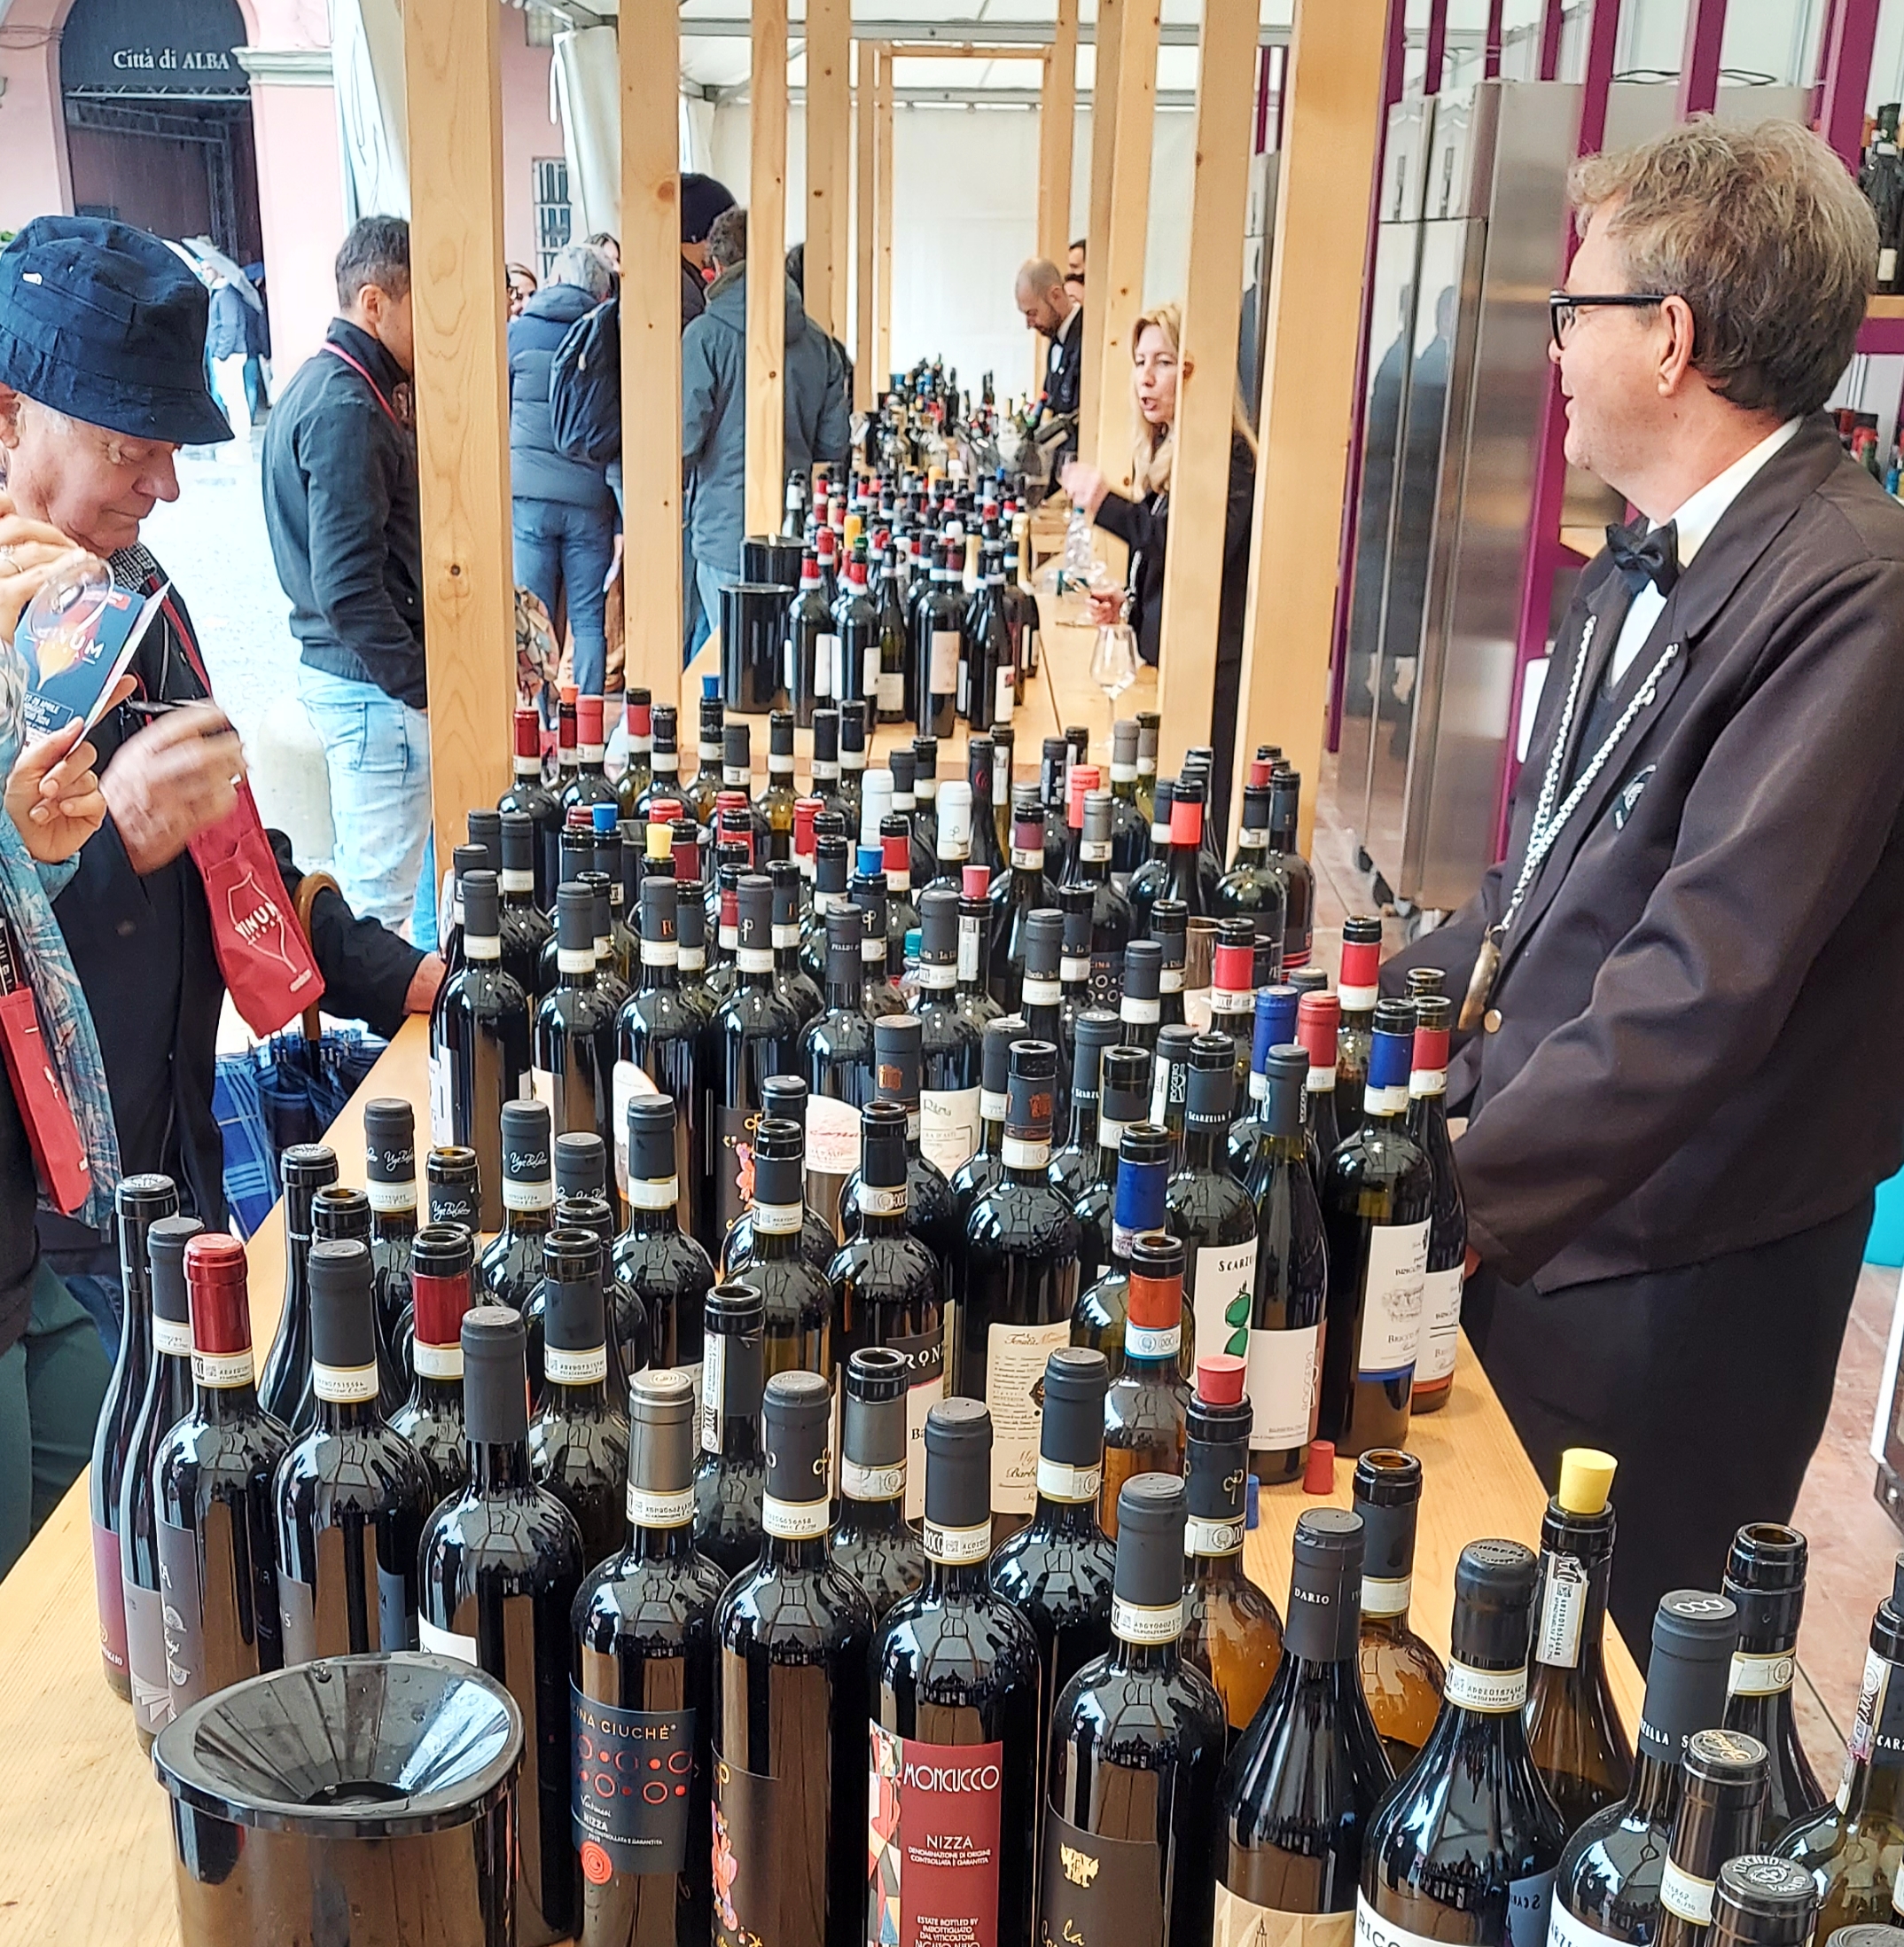 A selection of over 100 red wines to sample at Vinum Alba Italy